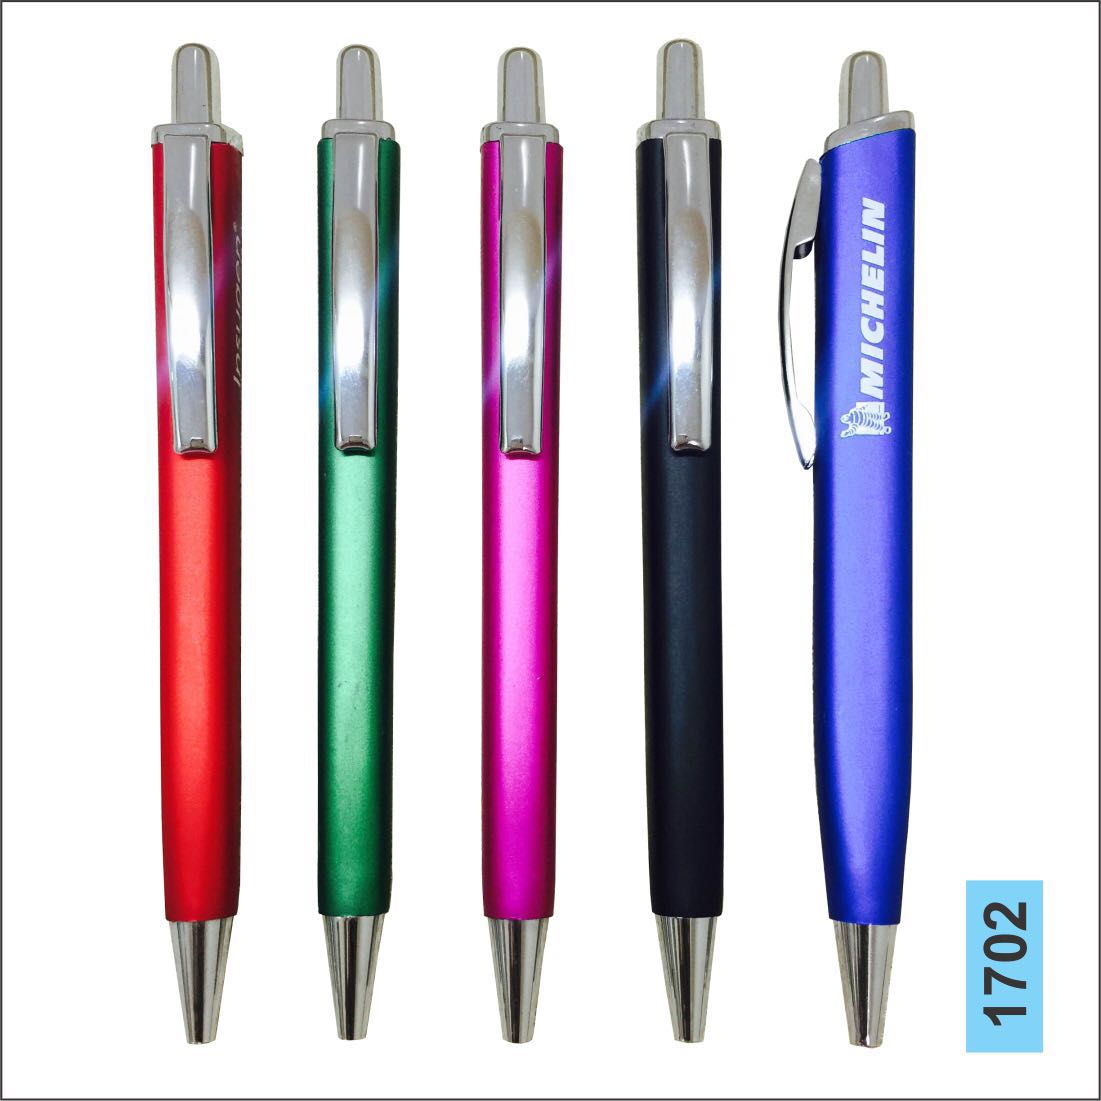 Make Your Handwriting Better With The Quality Plastic Pens In Ahmedabad!